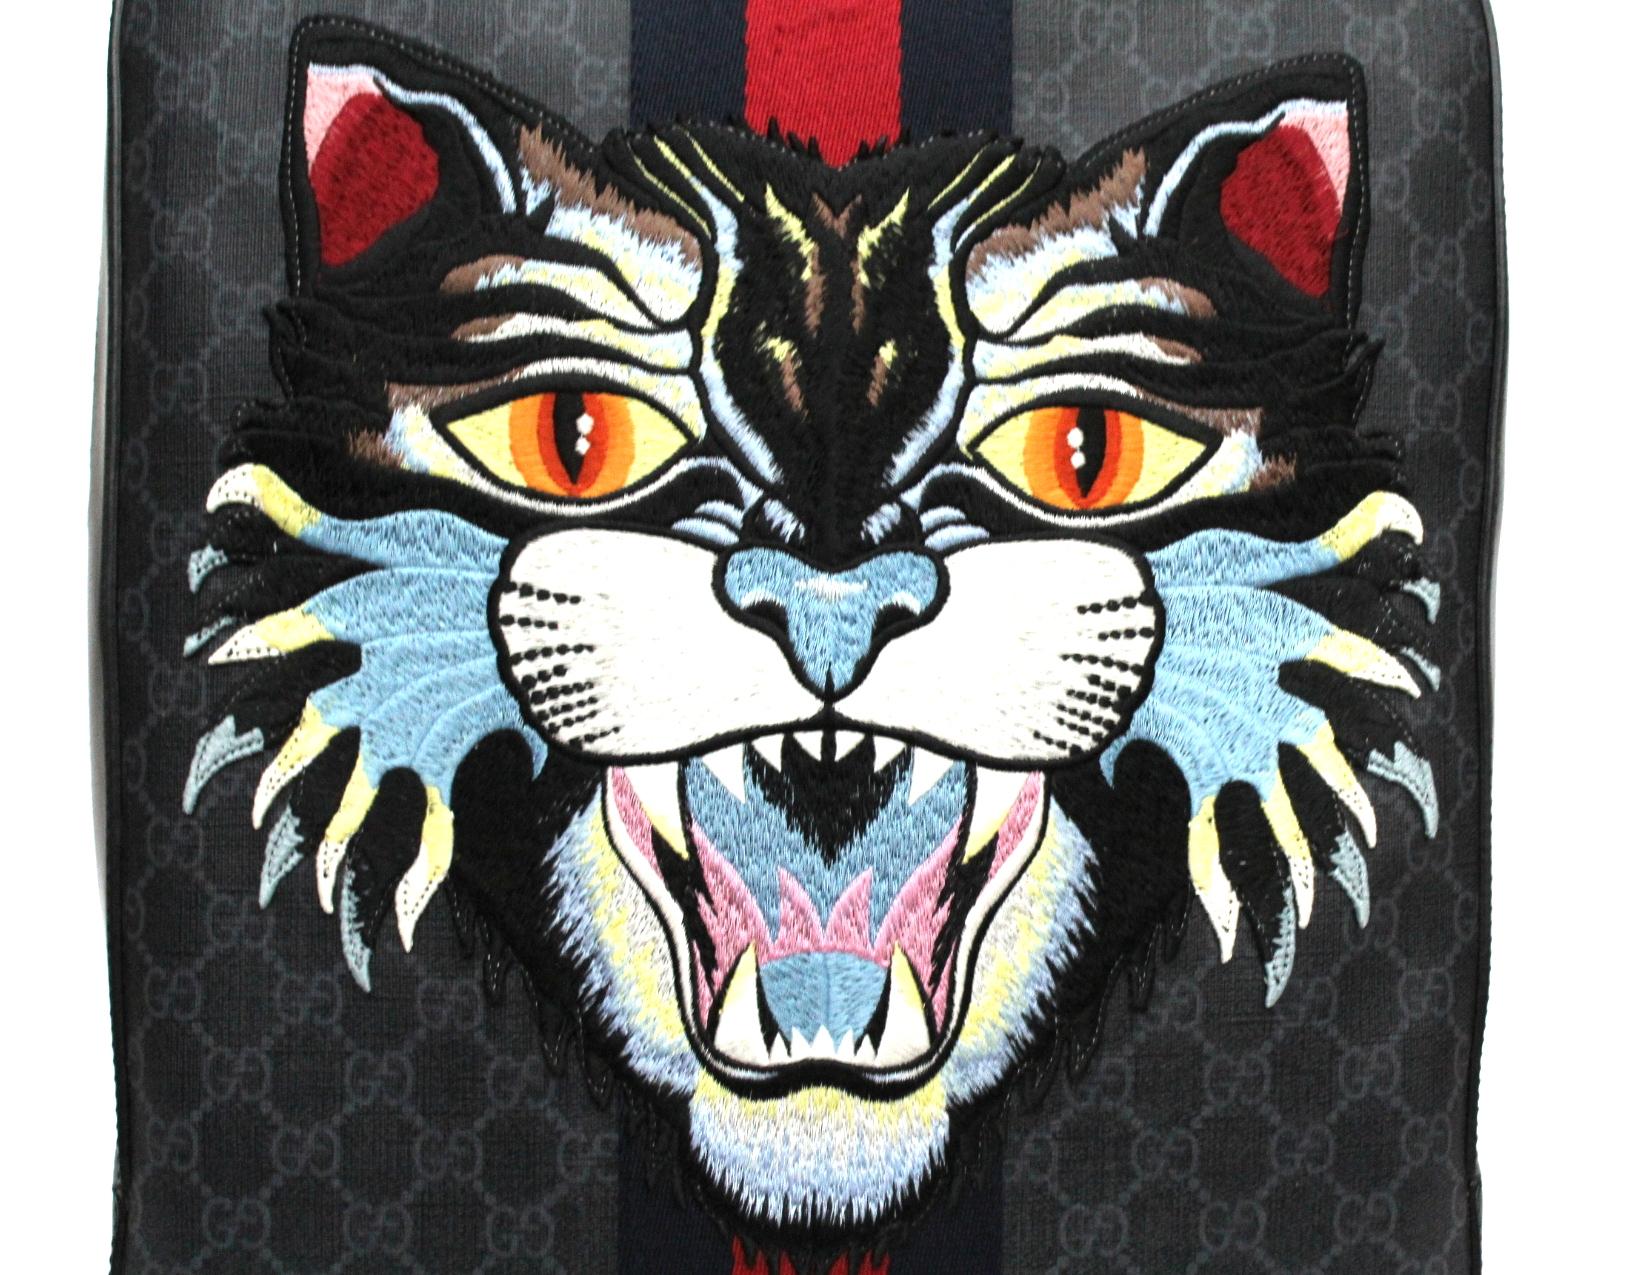 The snarling cat head is embroidered and applied to a structured backpack made in GG Supreme canvas with Web stripe.
Black/grey GG Supreme canvas, a material with low environmental impact, with black leather trim
Palladium-toned hardware
Blue and